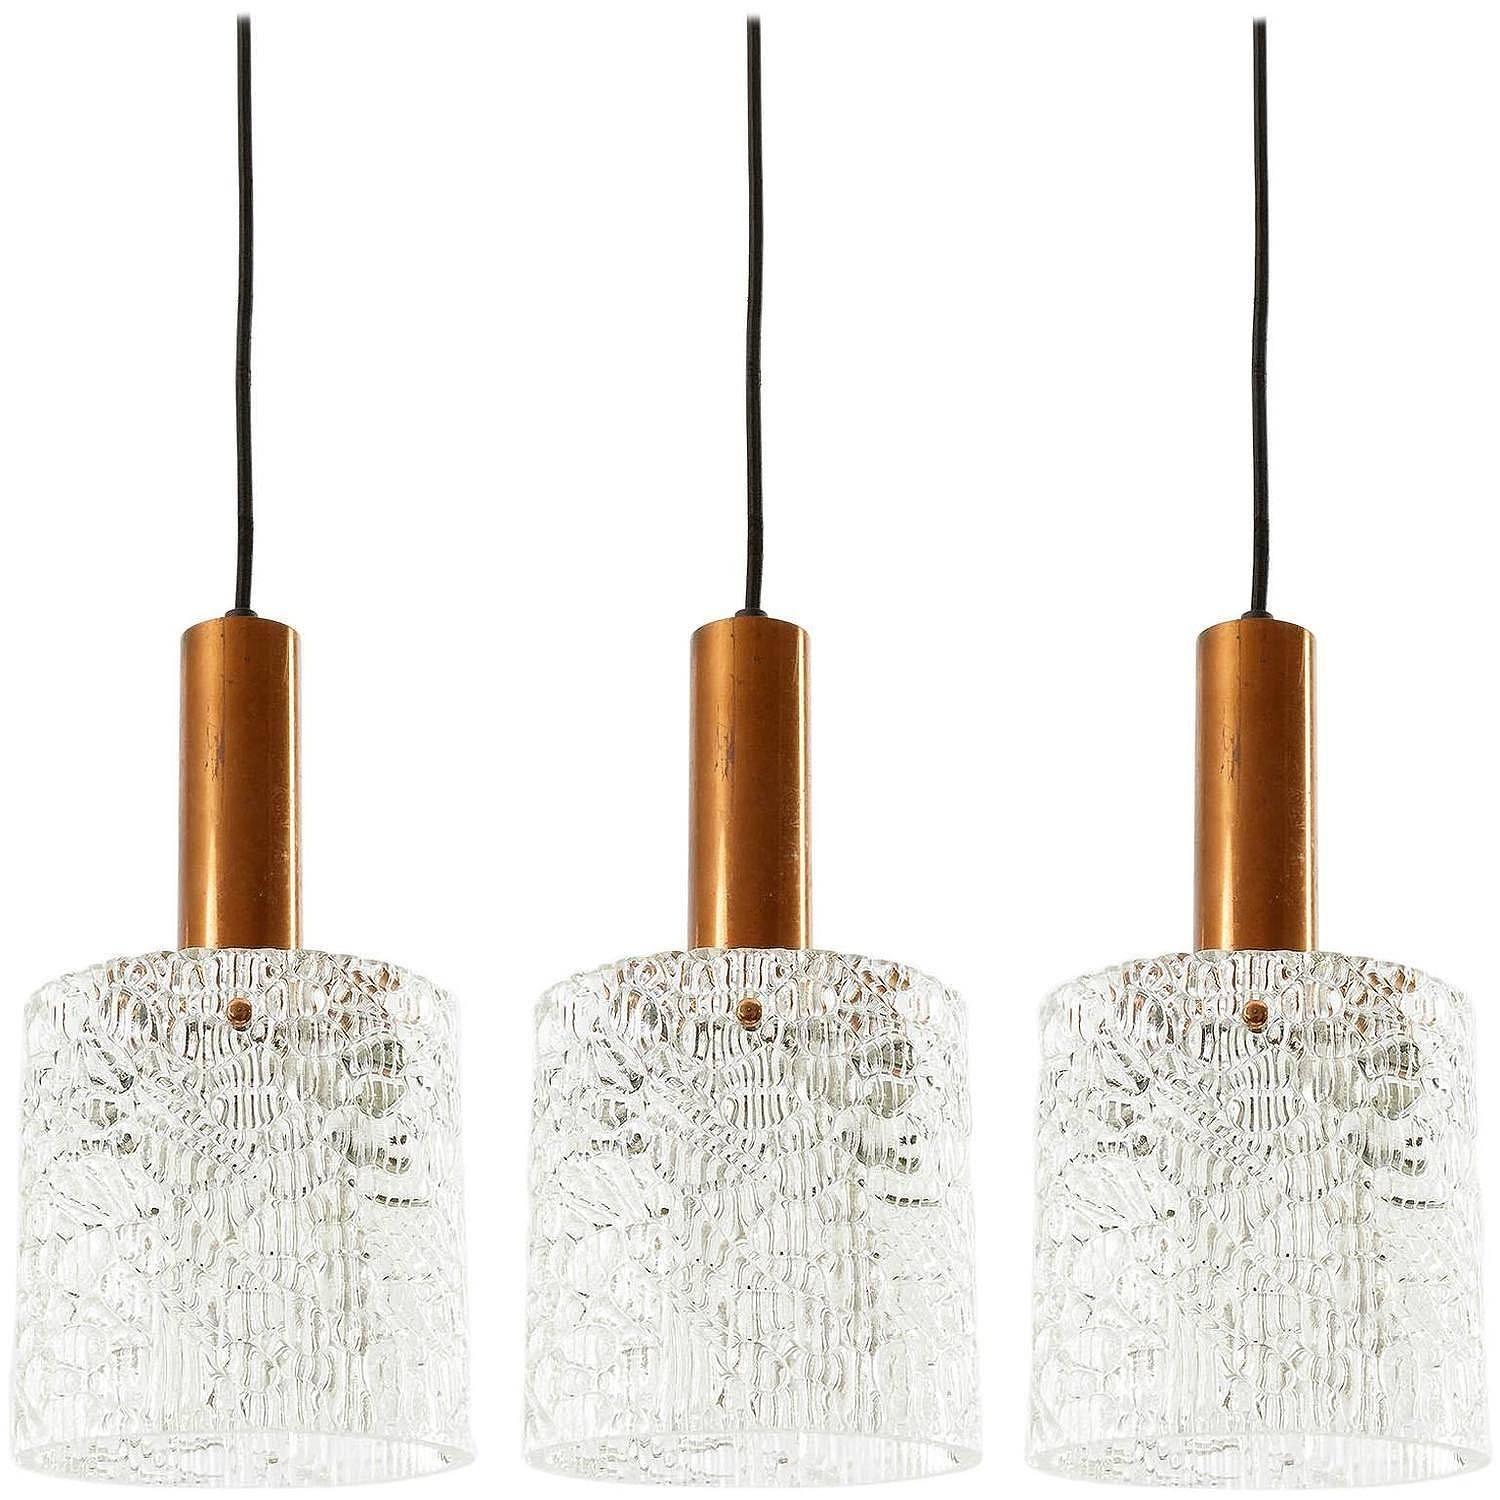 One of Six Kalmar Pendant Lights, Textured Glass and Patinated Copper, 1950s For Sale